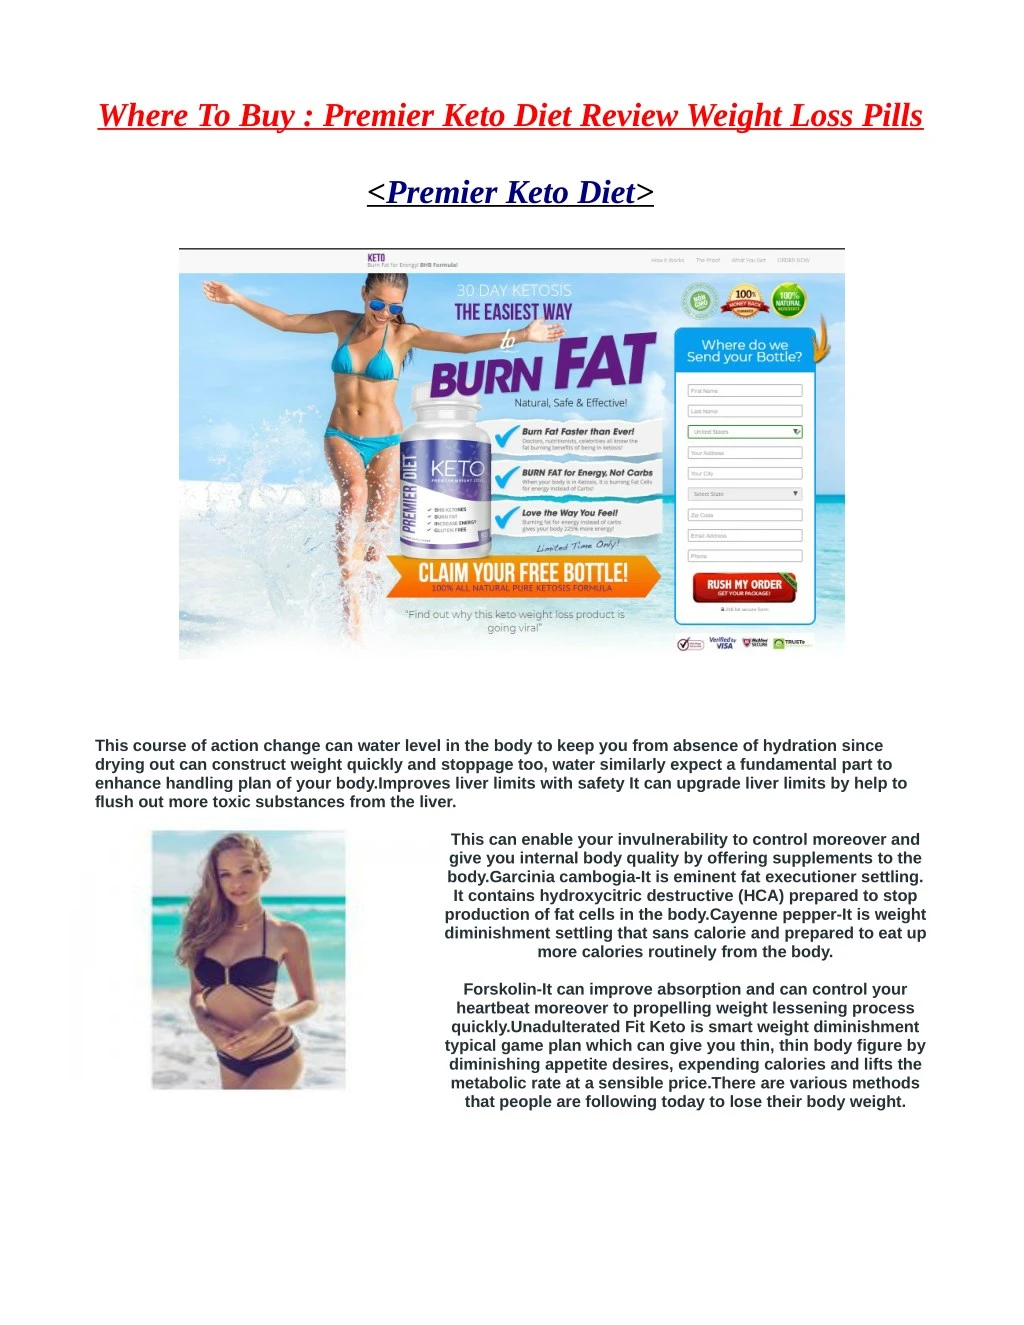 where to buy premier keto diet review weight loss